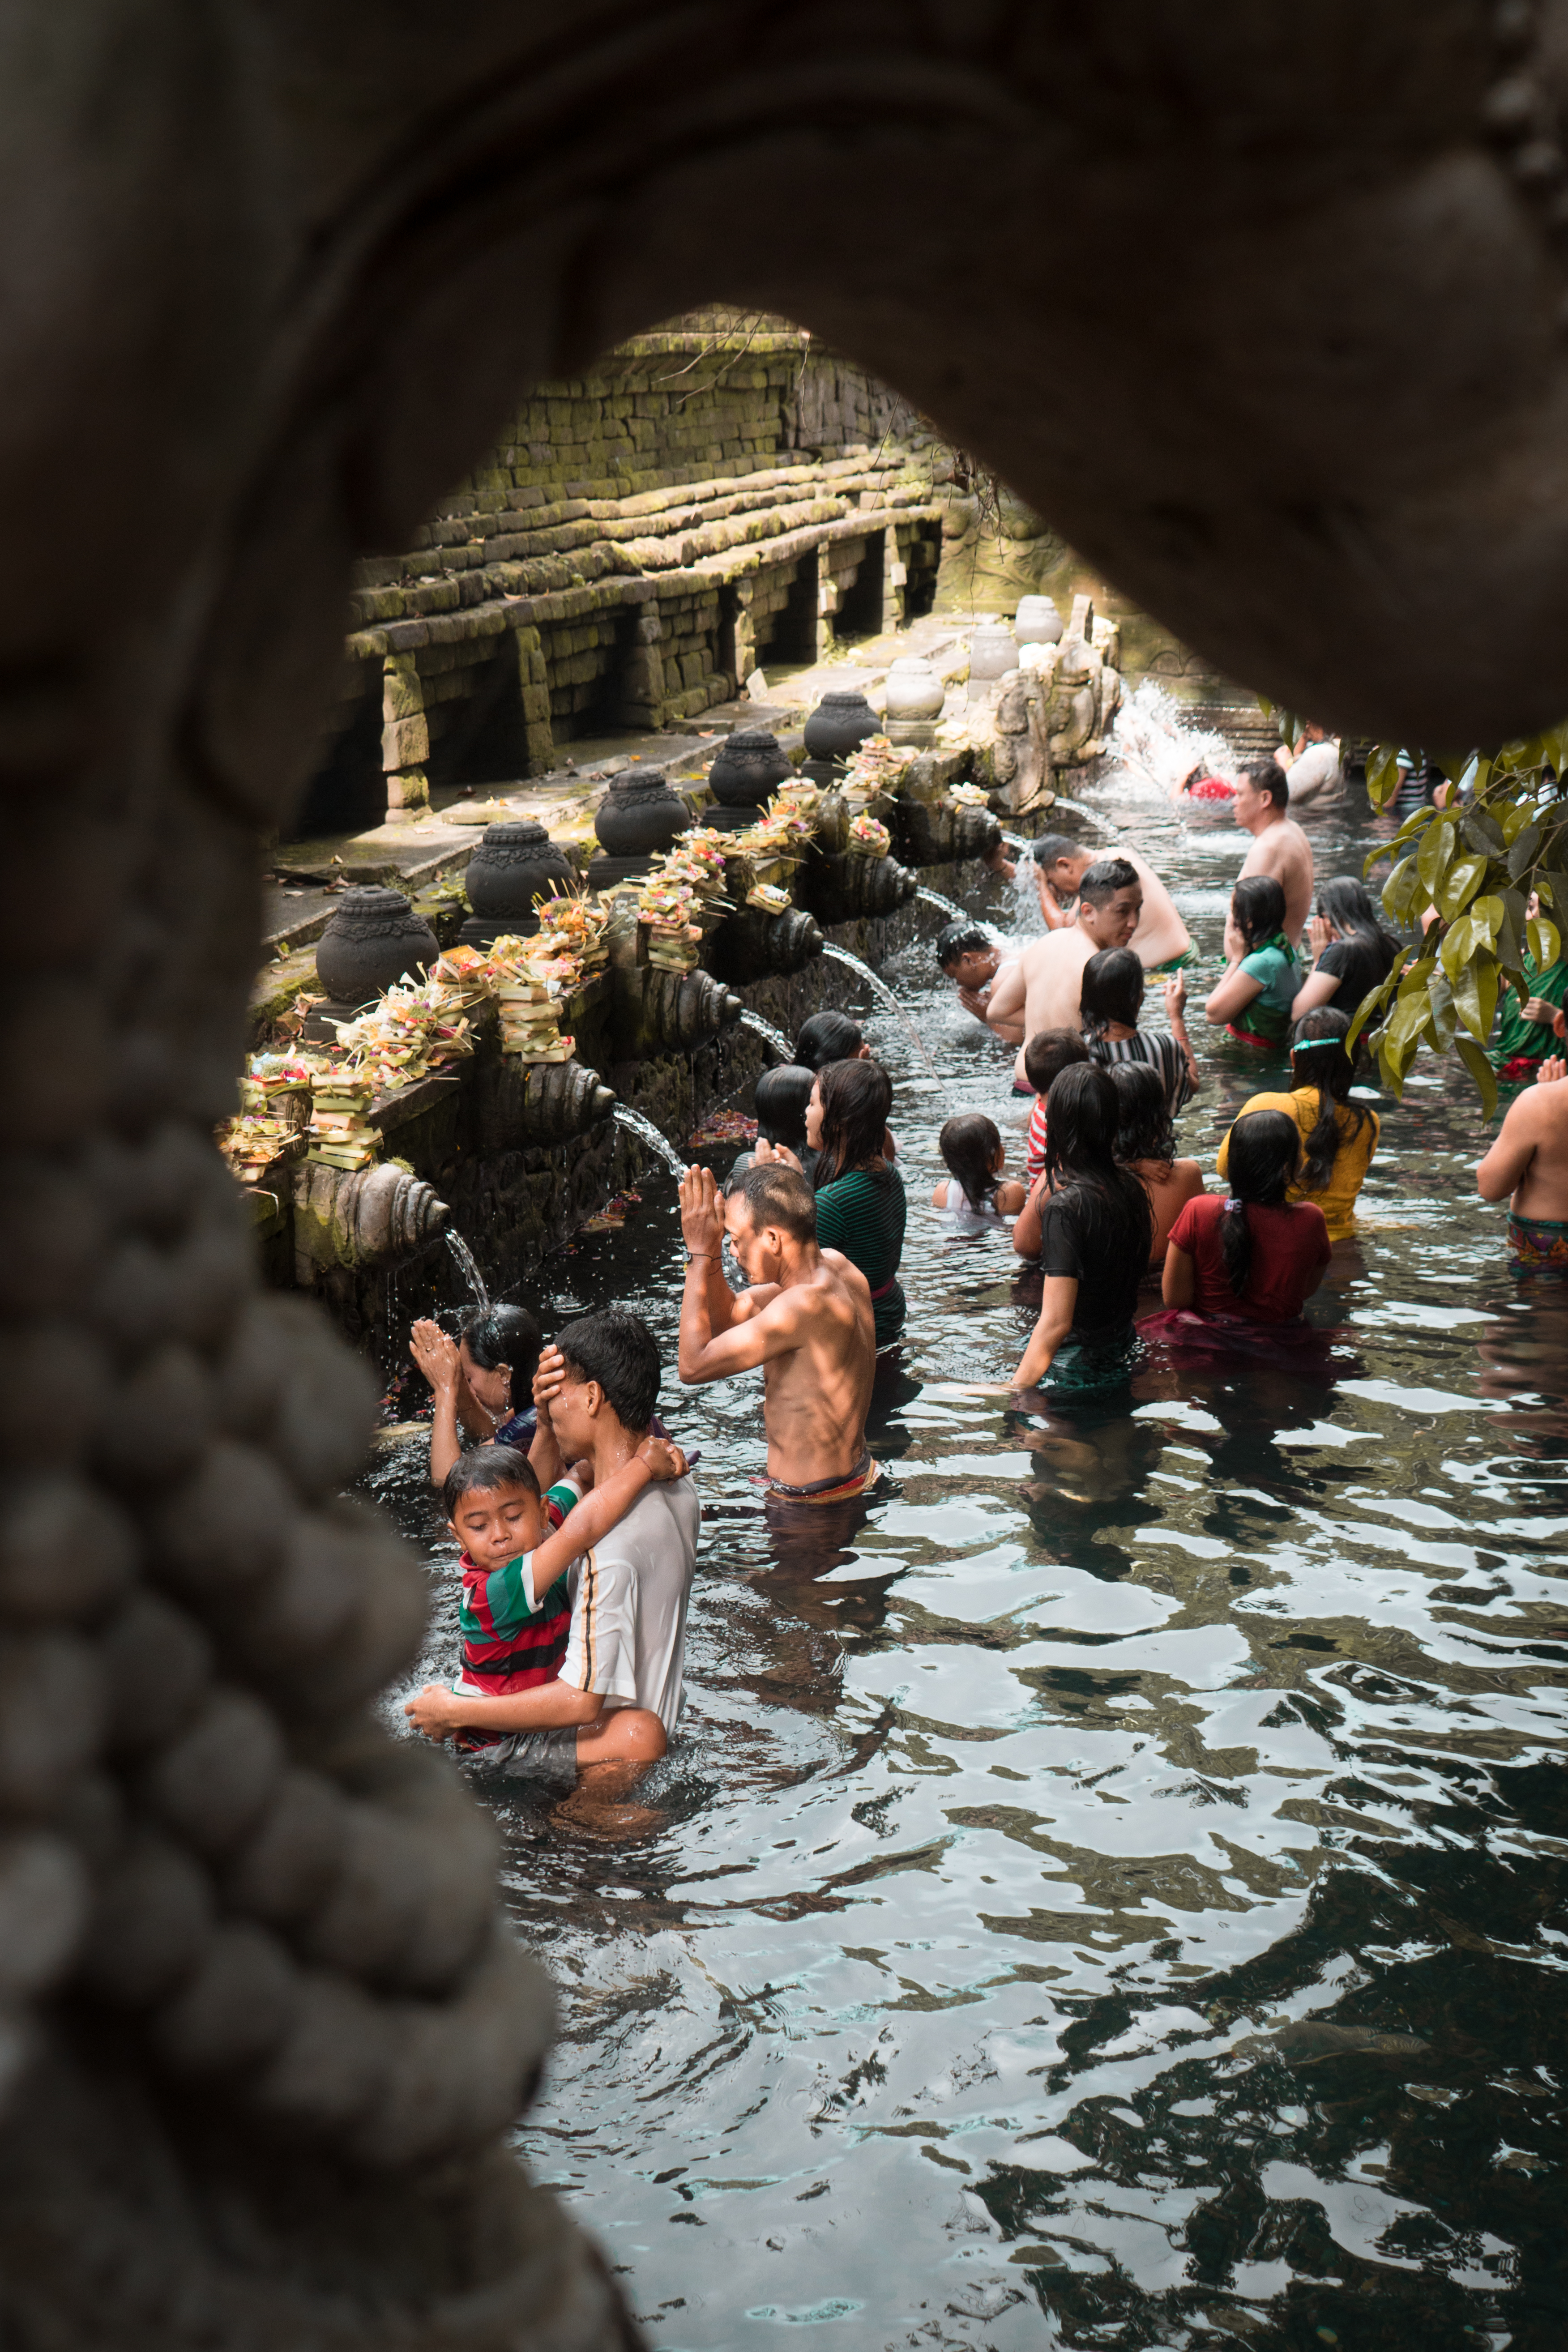 This photo  showcases the cultural diversity of these Balinese Locals by engaging in their religious practice of spiritually cleansing themselves